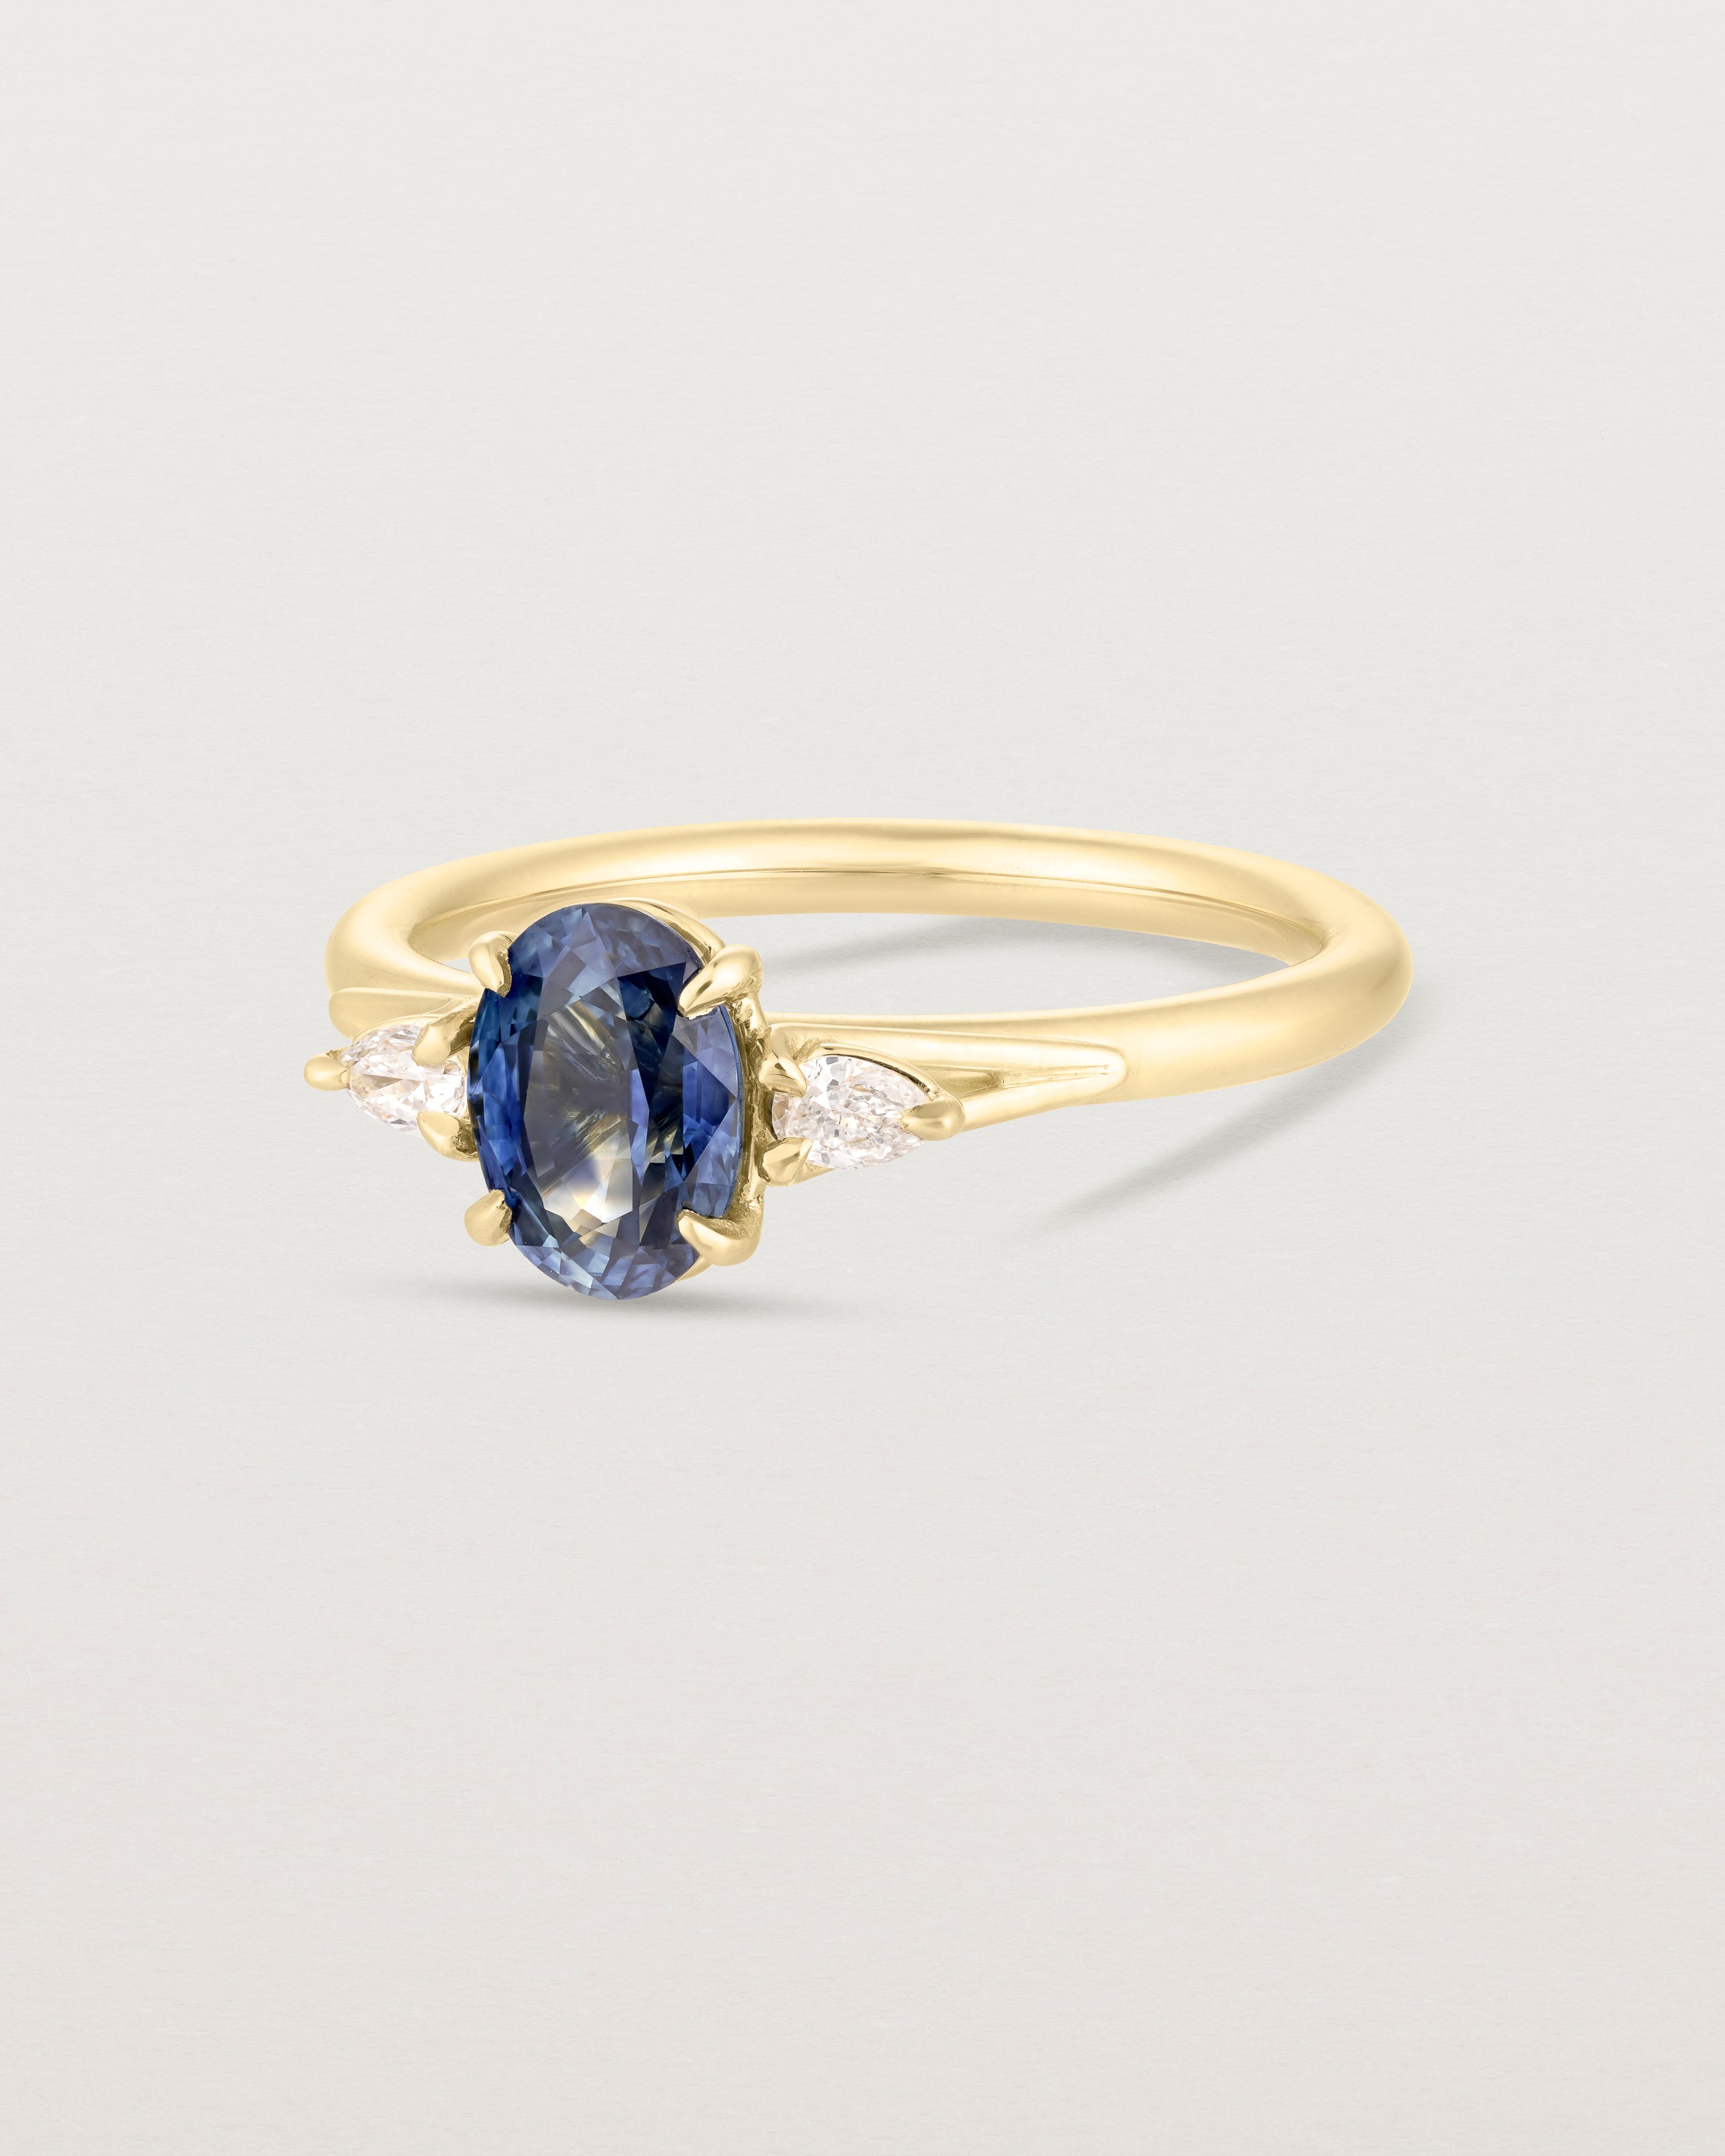 Front image of blue sapphire trio ring with white diamonds.